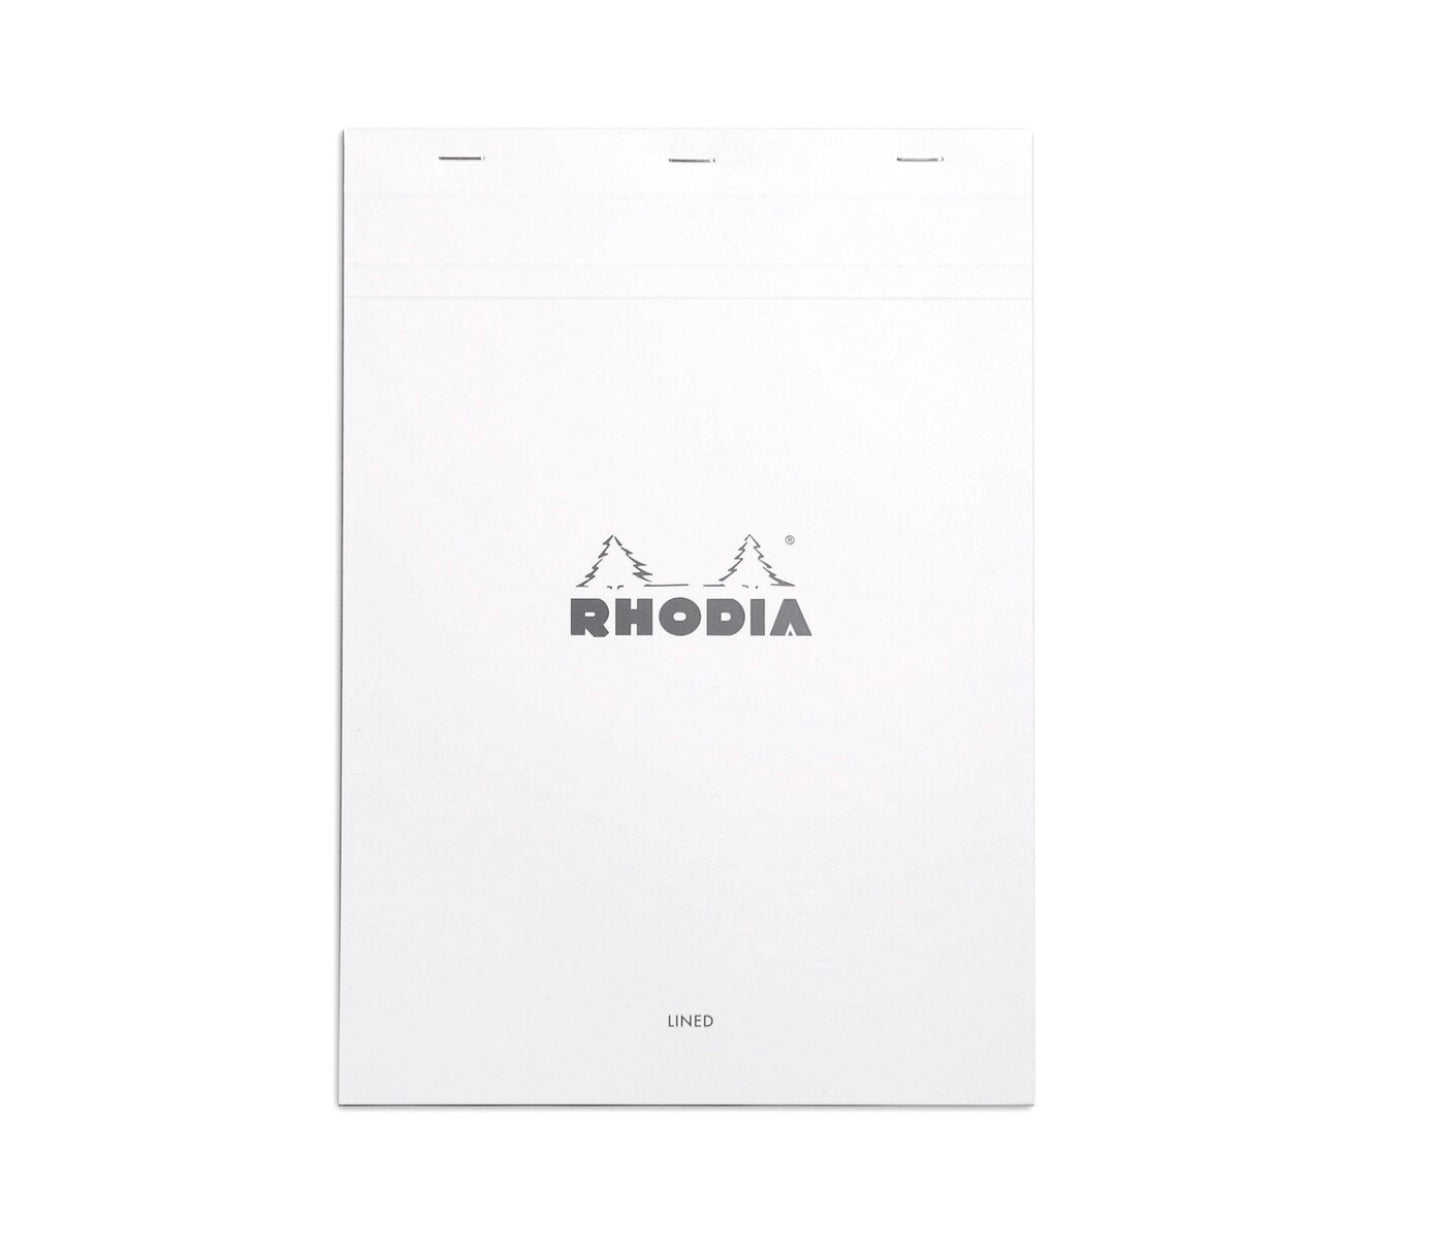 Rhodia Notepad Stapled N° 18 Lined - White